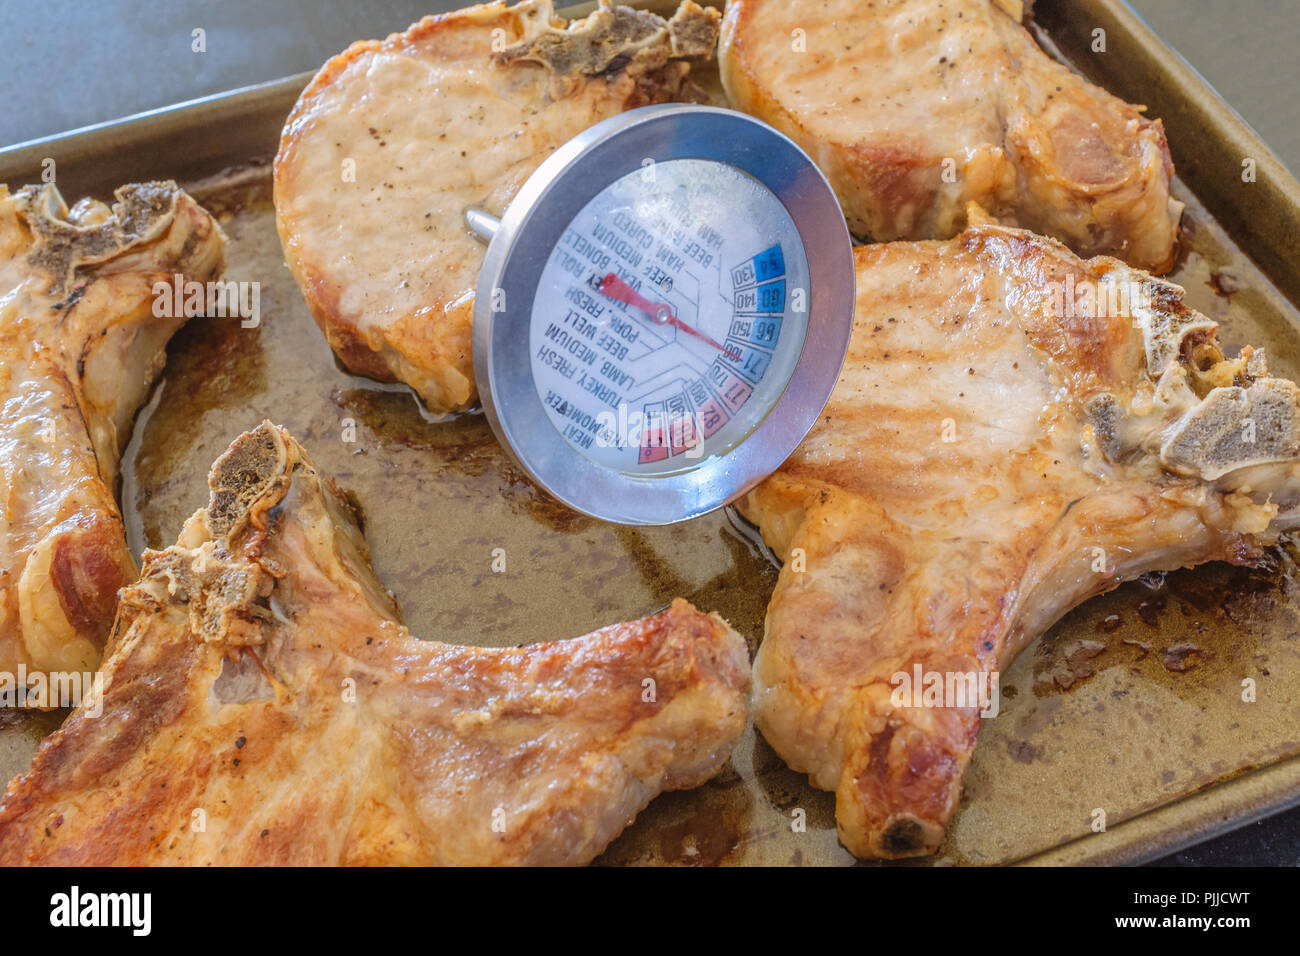 Meat Thermometer Taking The Temperature Of Thick Pork Chops Hot After Baking On A Metal Baking Tray Stock Photo Alamy,How To Get Rid Of Black Ants In Car